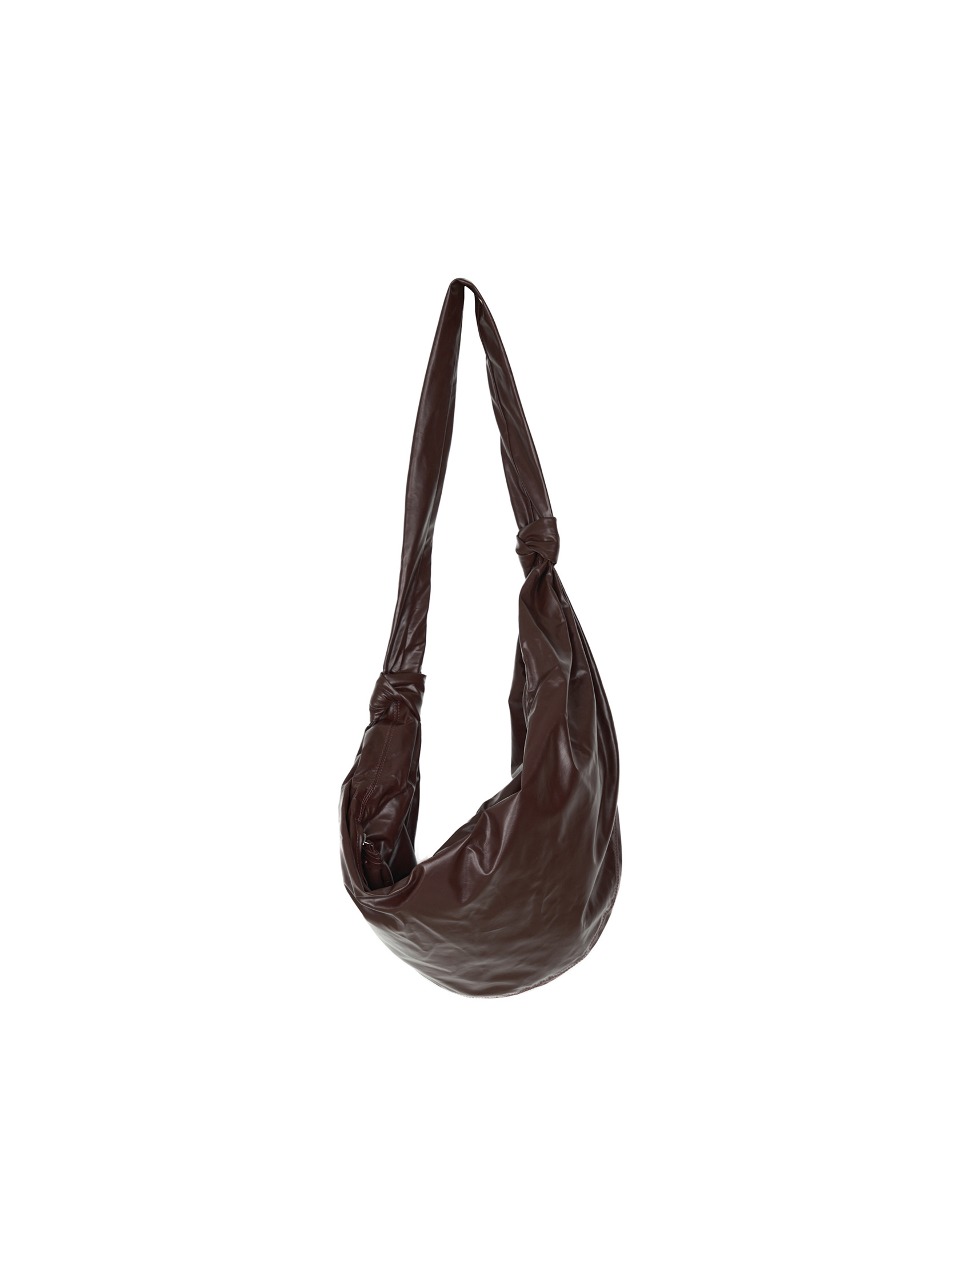 LEMAIRE - LARGE SOFT LIGHTWEIGHT CROISSANT BAG (ROASTED PECAN)